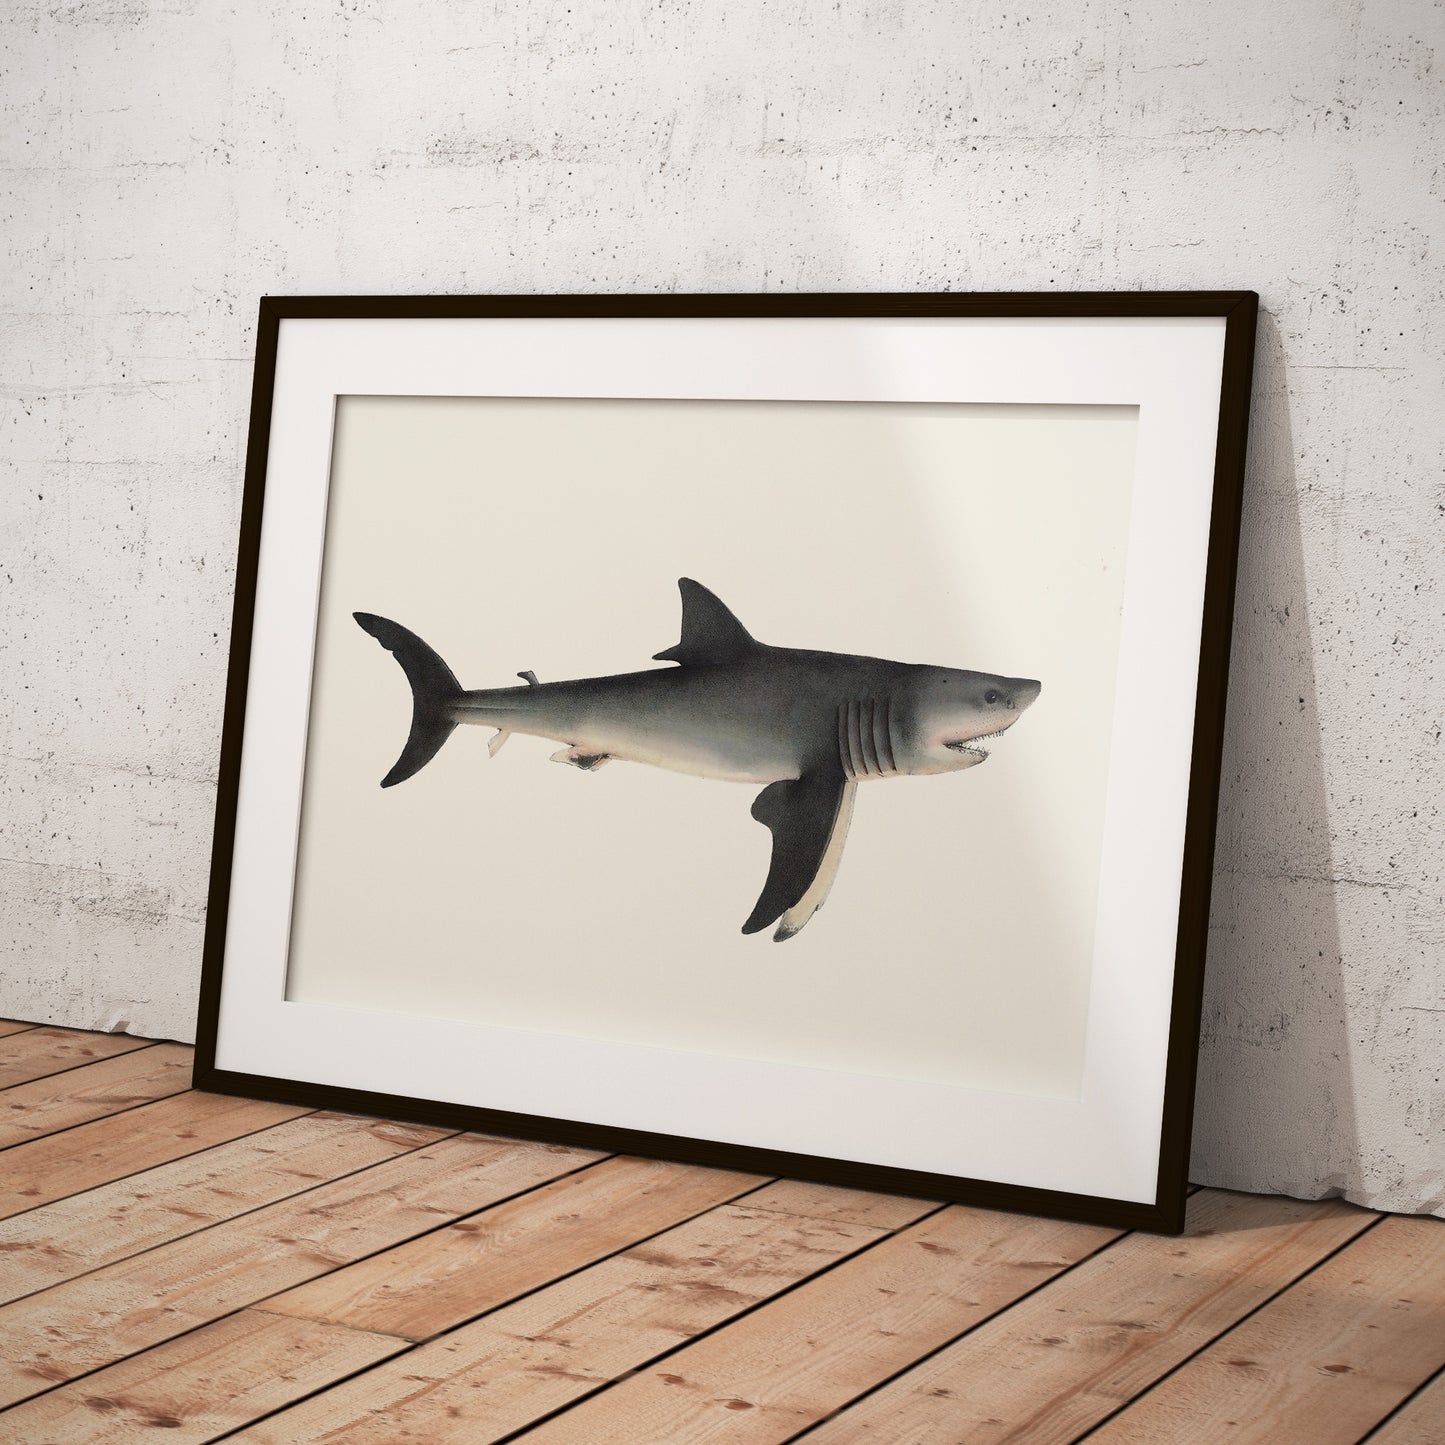 The great white shark - Carcharodon carcharias